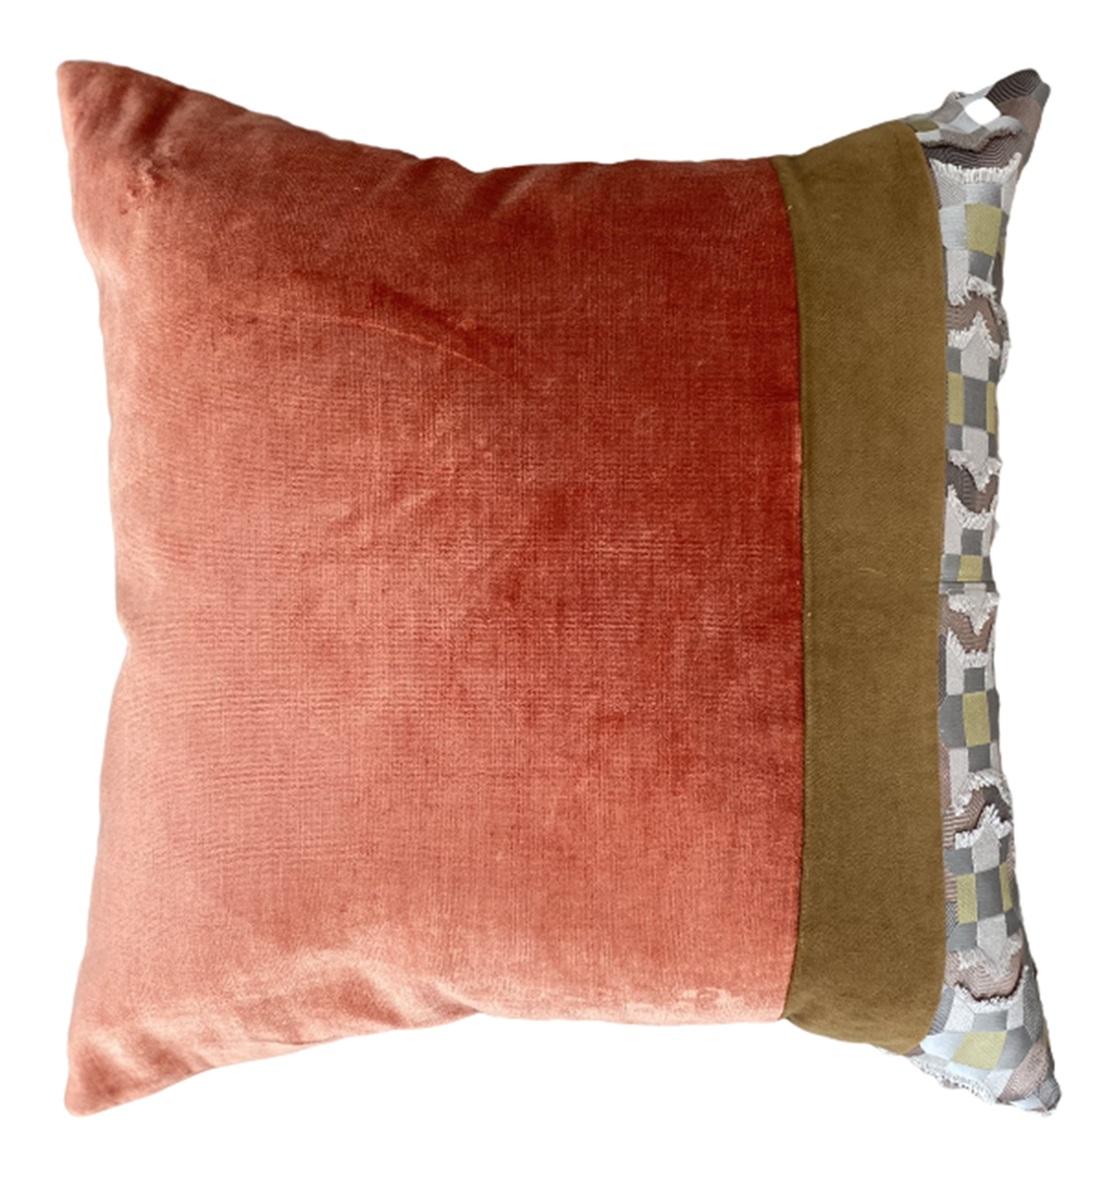 American Tangerine Velvet with Saddle Brown Velvet Accent and Grey Silk Feature Fabric